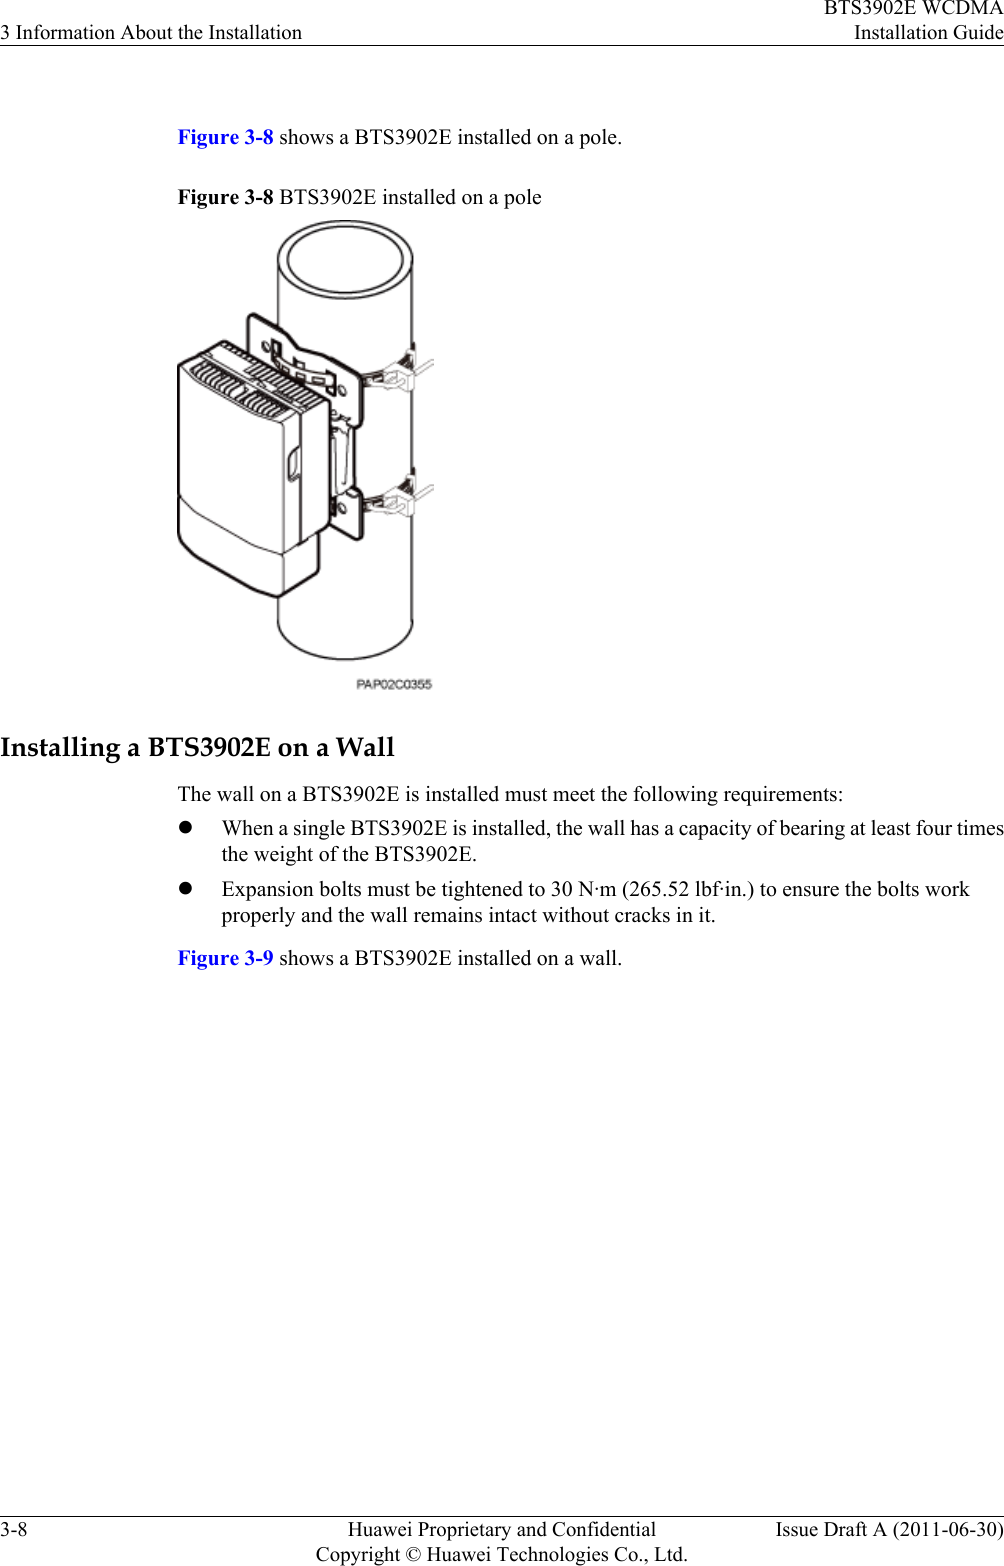  Figure 3-8 shows a BTS3902E installed on a pole.Figure 3-8 BTS3902E installed on a poleInstalling a BTS3902E on a WallThe wall on a BTS3902E is installed must meet the following requirements:lWhen a single BTS3902E is installed, the wall has a capacity of bearing at least four timesthe weight of the BTS3902E.lExpansion bolts must be tightened to 30 N·m (265.52 lbf·in.) to ensure the bolts workproperly and the wall remains intact without cracks in it.Figure 3-9 shows a BTS3902E installed on a wall.3 Information About the InstallationBTS3902E WCDMAInstallation Guide3-8 Huawei Proprietary and ConfidentialCopyright © Huawei Technologies Co., Ltd.Issue Draft A (2011-06-30)